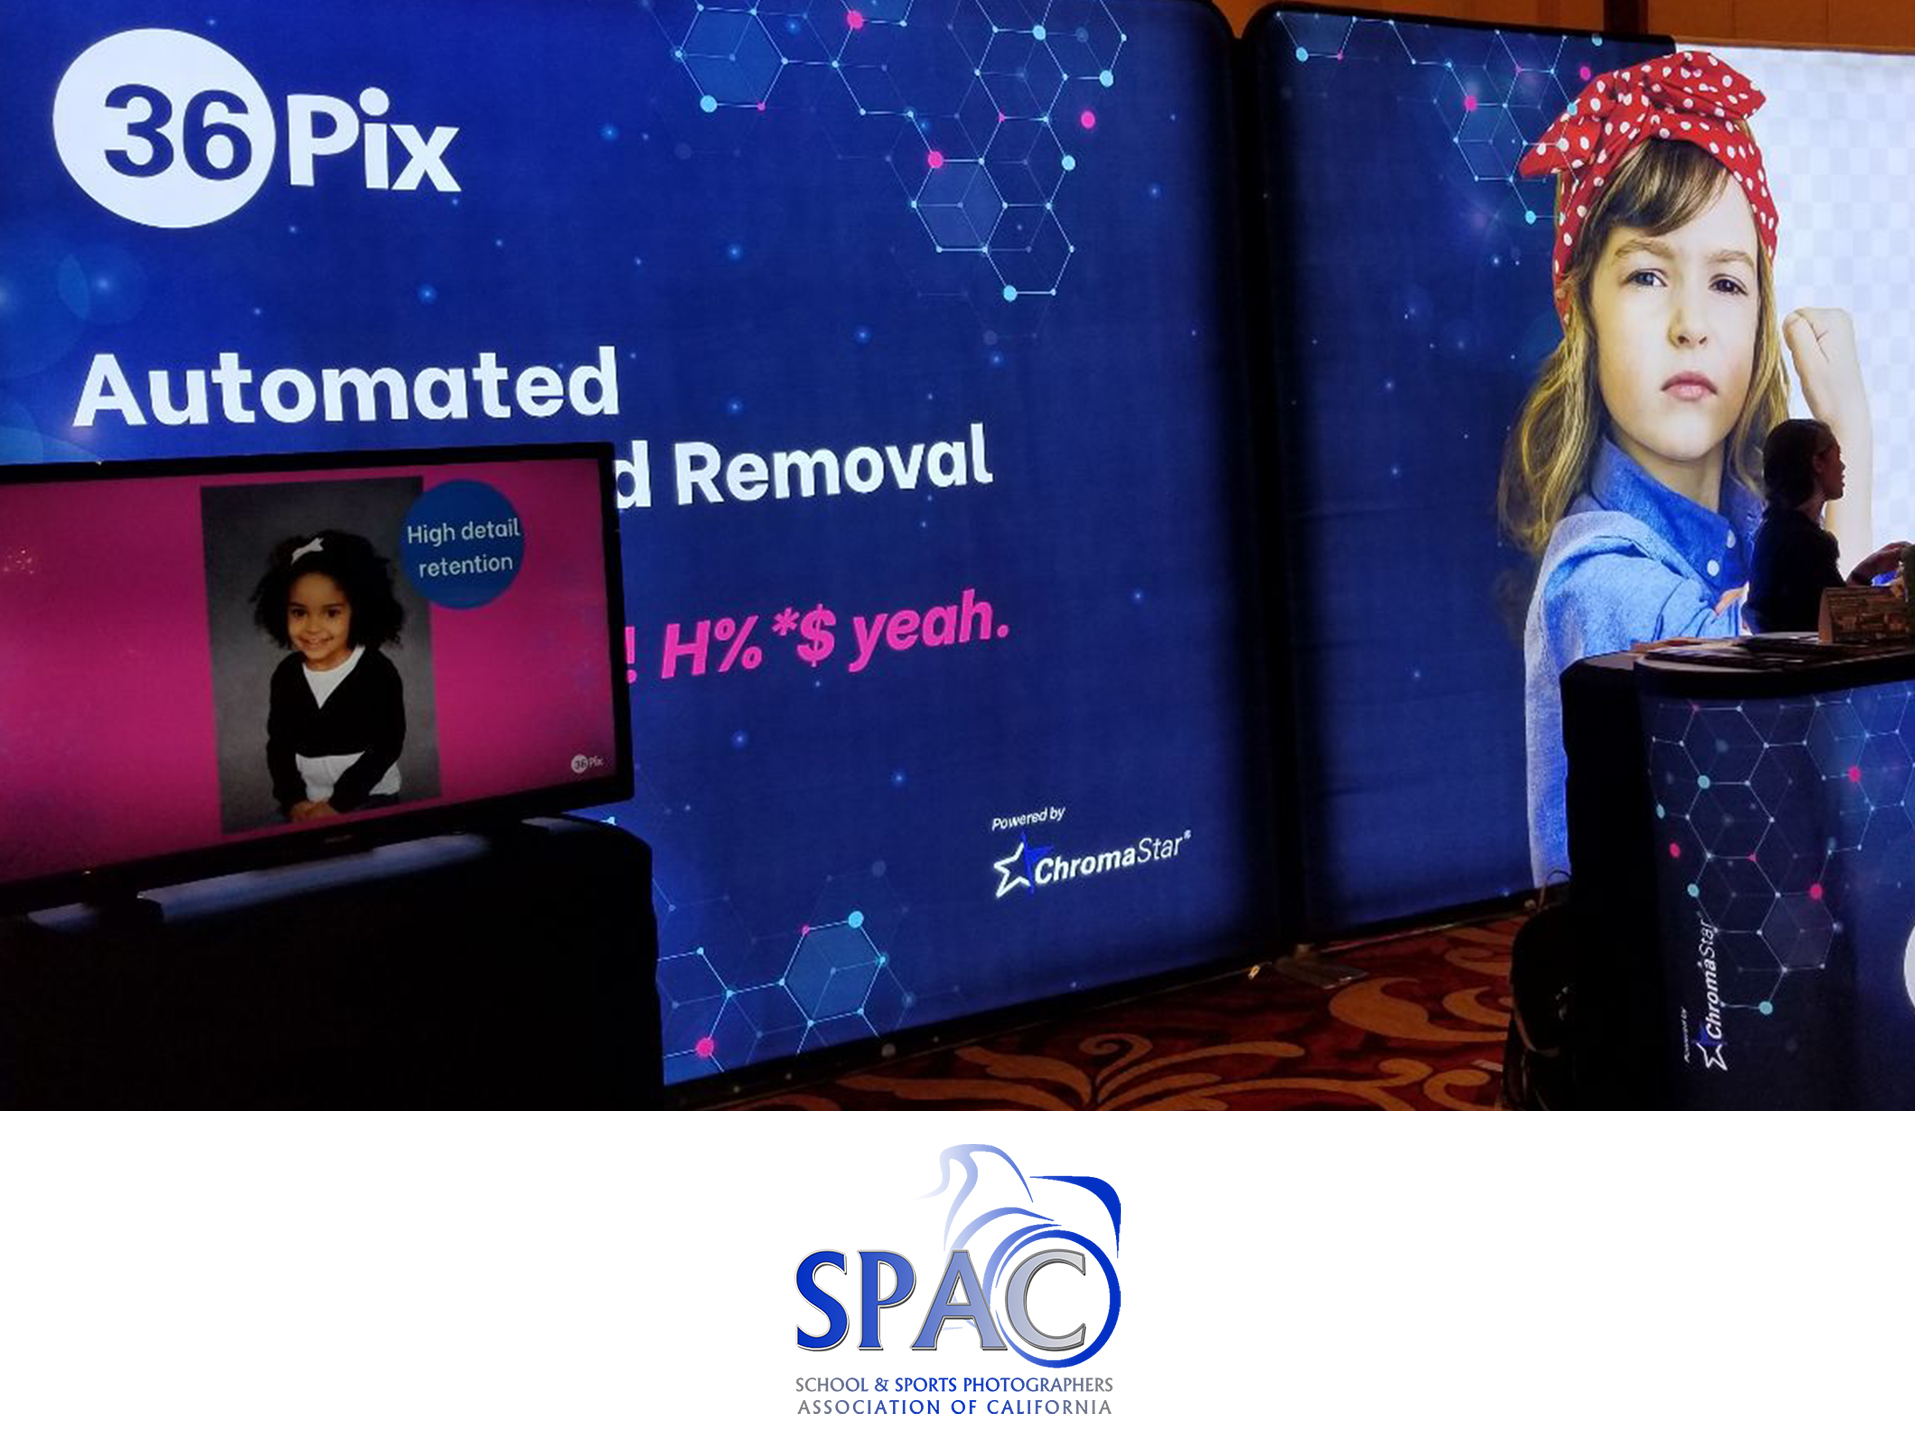 36Pix booth setup at the SPAC trade show in Las Vegas